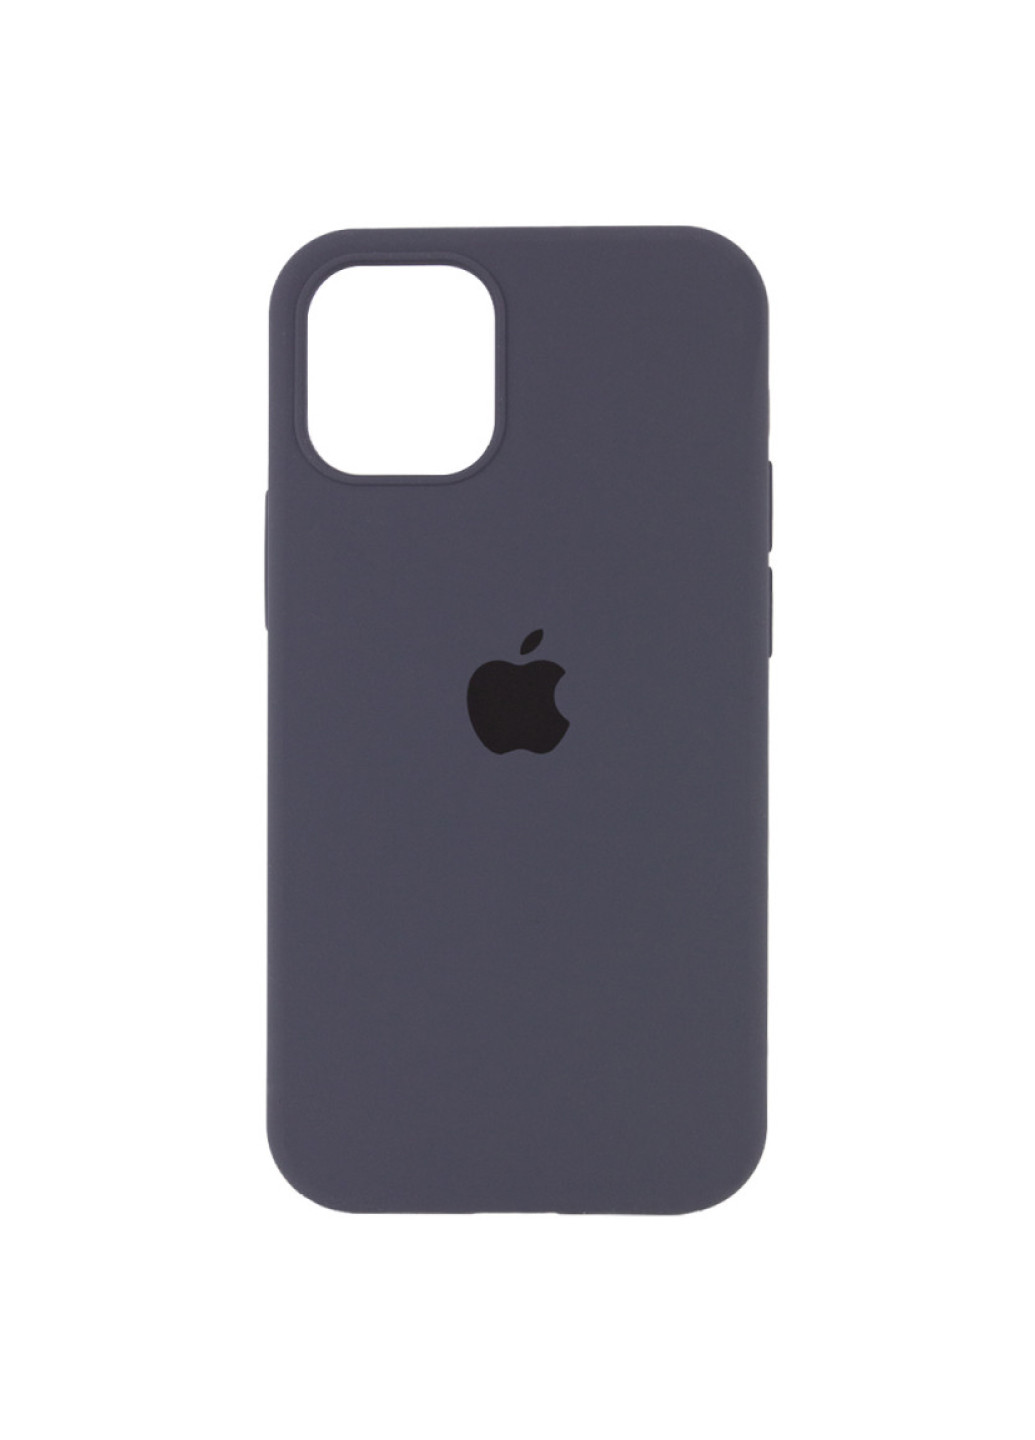 Чехол для iPhone 13 Pro Max Silicone Case Charcoal Gray No Brand (257339486)